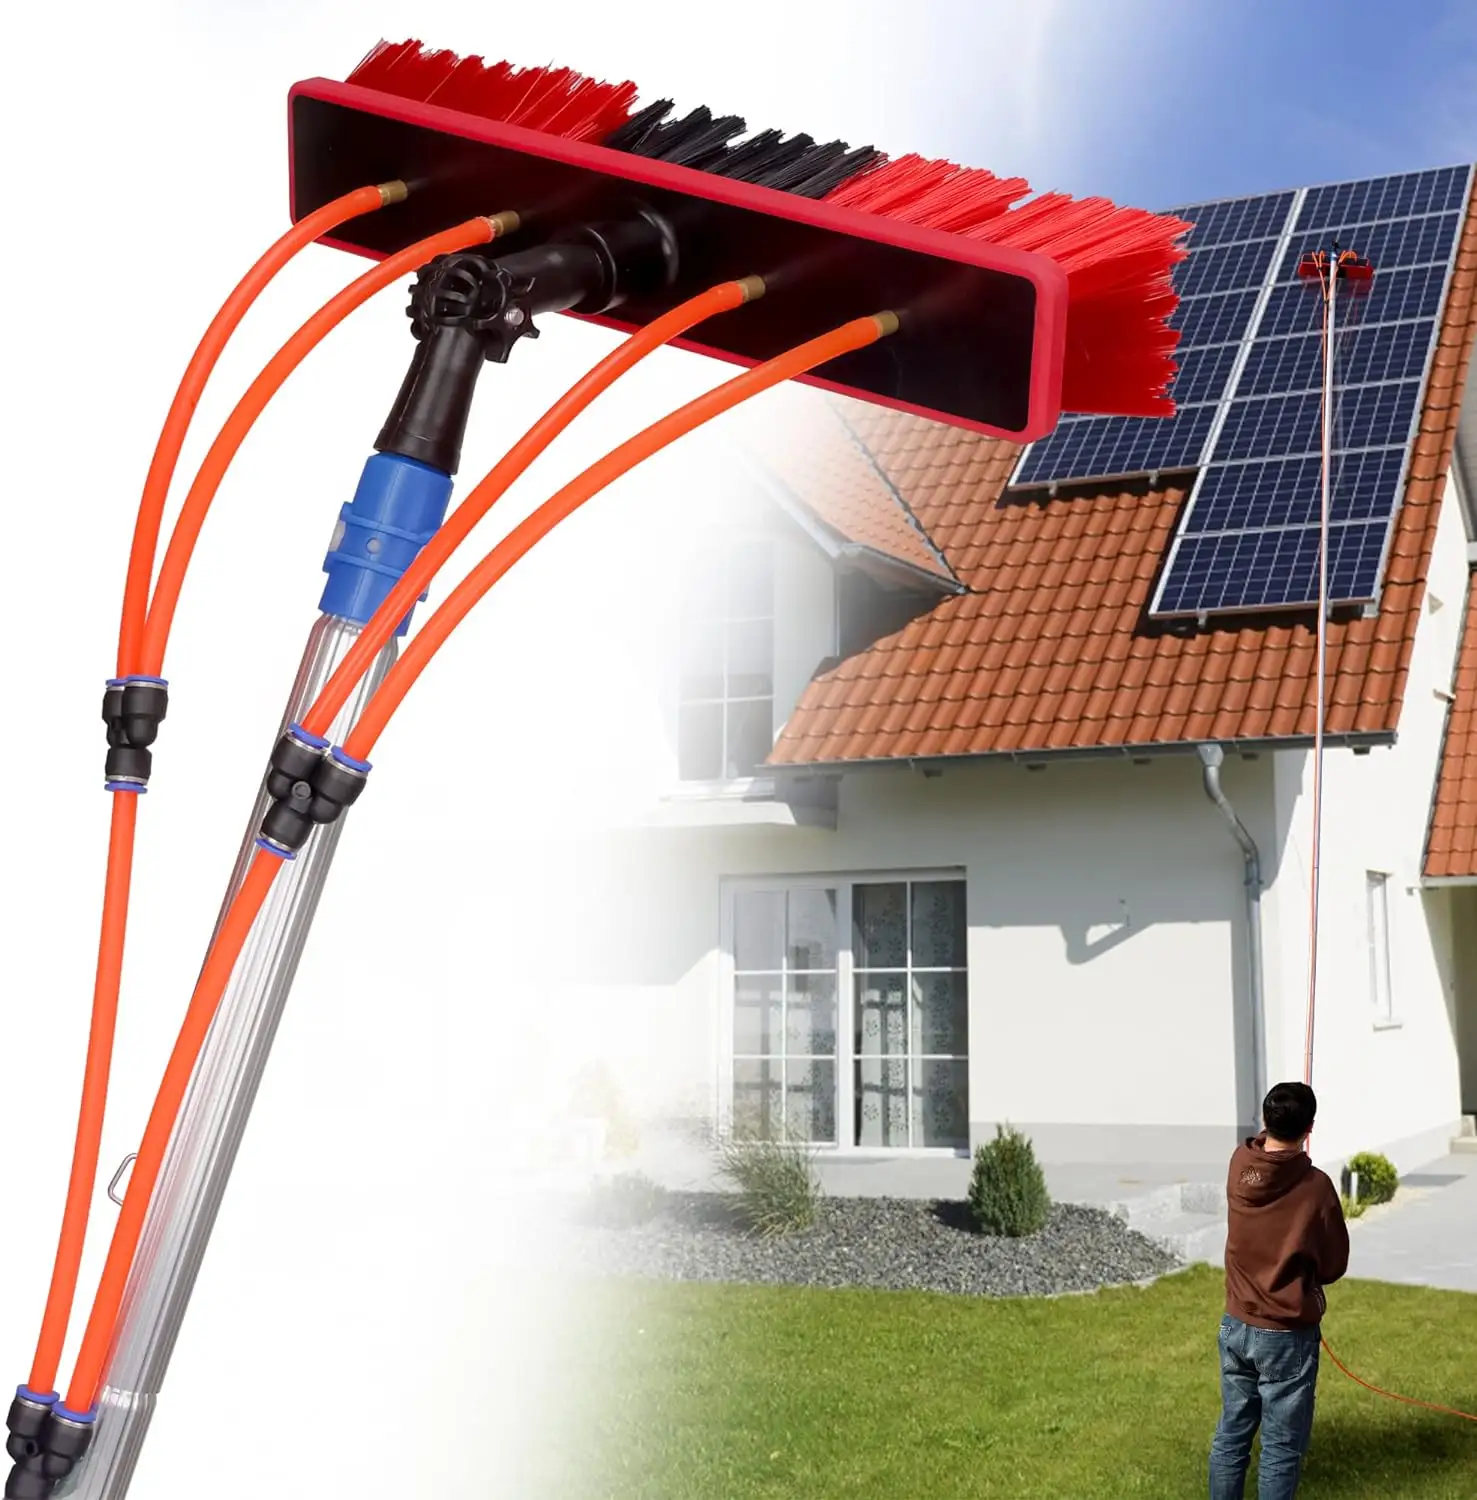 Water Fed Pole Kit  35 FT Adjustable Window Cleaning Brush and Pole  10m Length Window Cleaner Brush   Solar Panel Cleaning